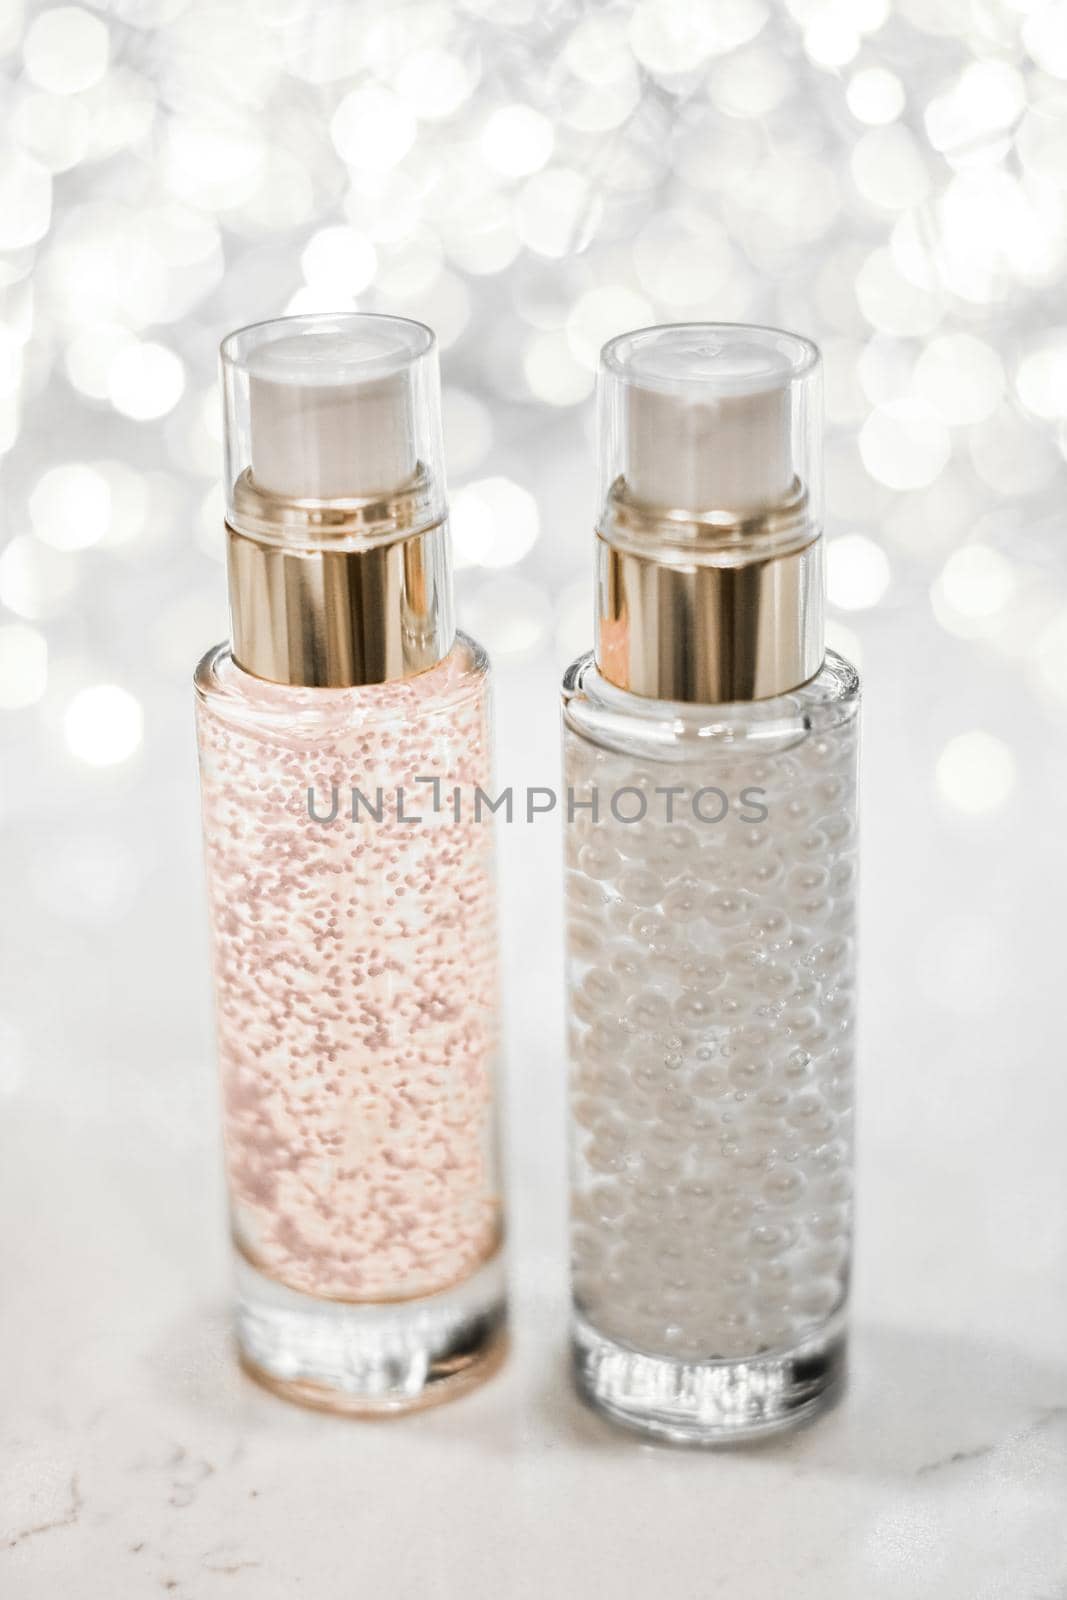 Holiday make-up base gel, serum emulsion, lotion bottle and silver glitter, luxury skin and body care cosmetics for beauty brand ads by Anneleven